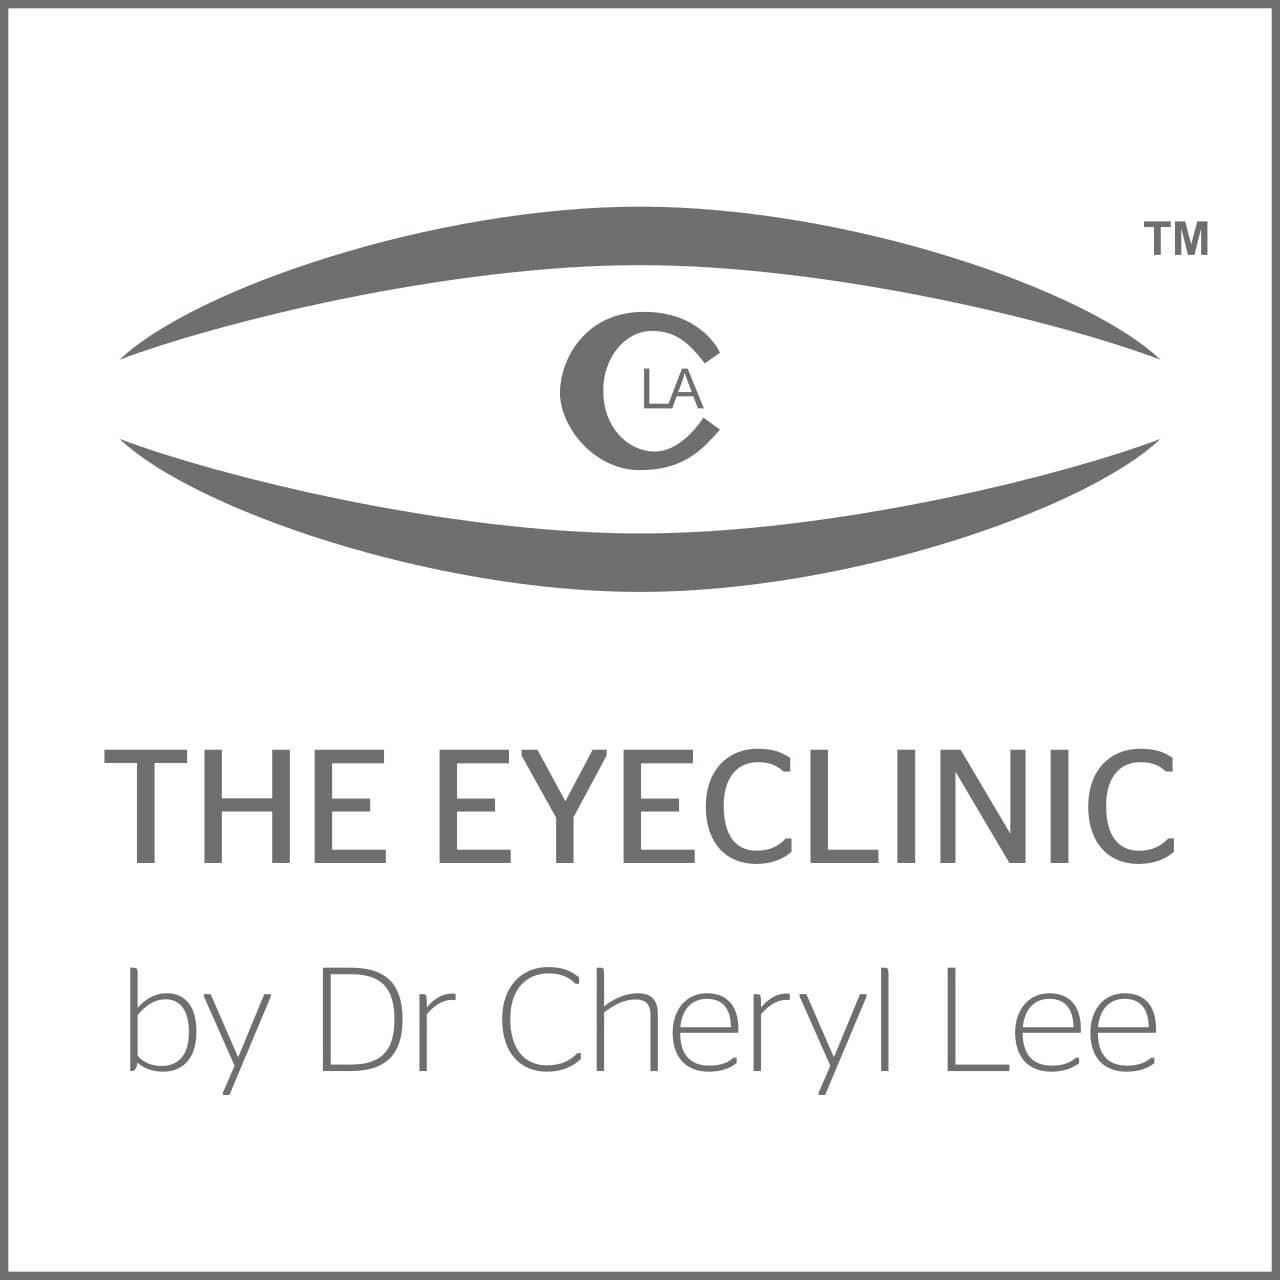 The Eyeclinic by Dr Cheryl Lee